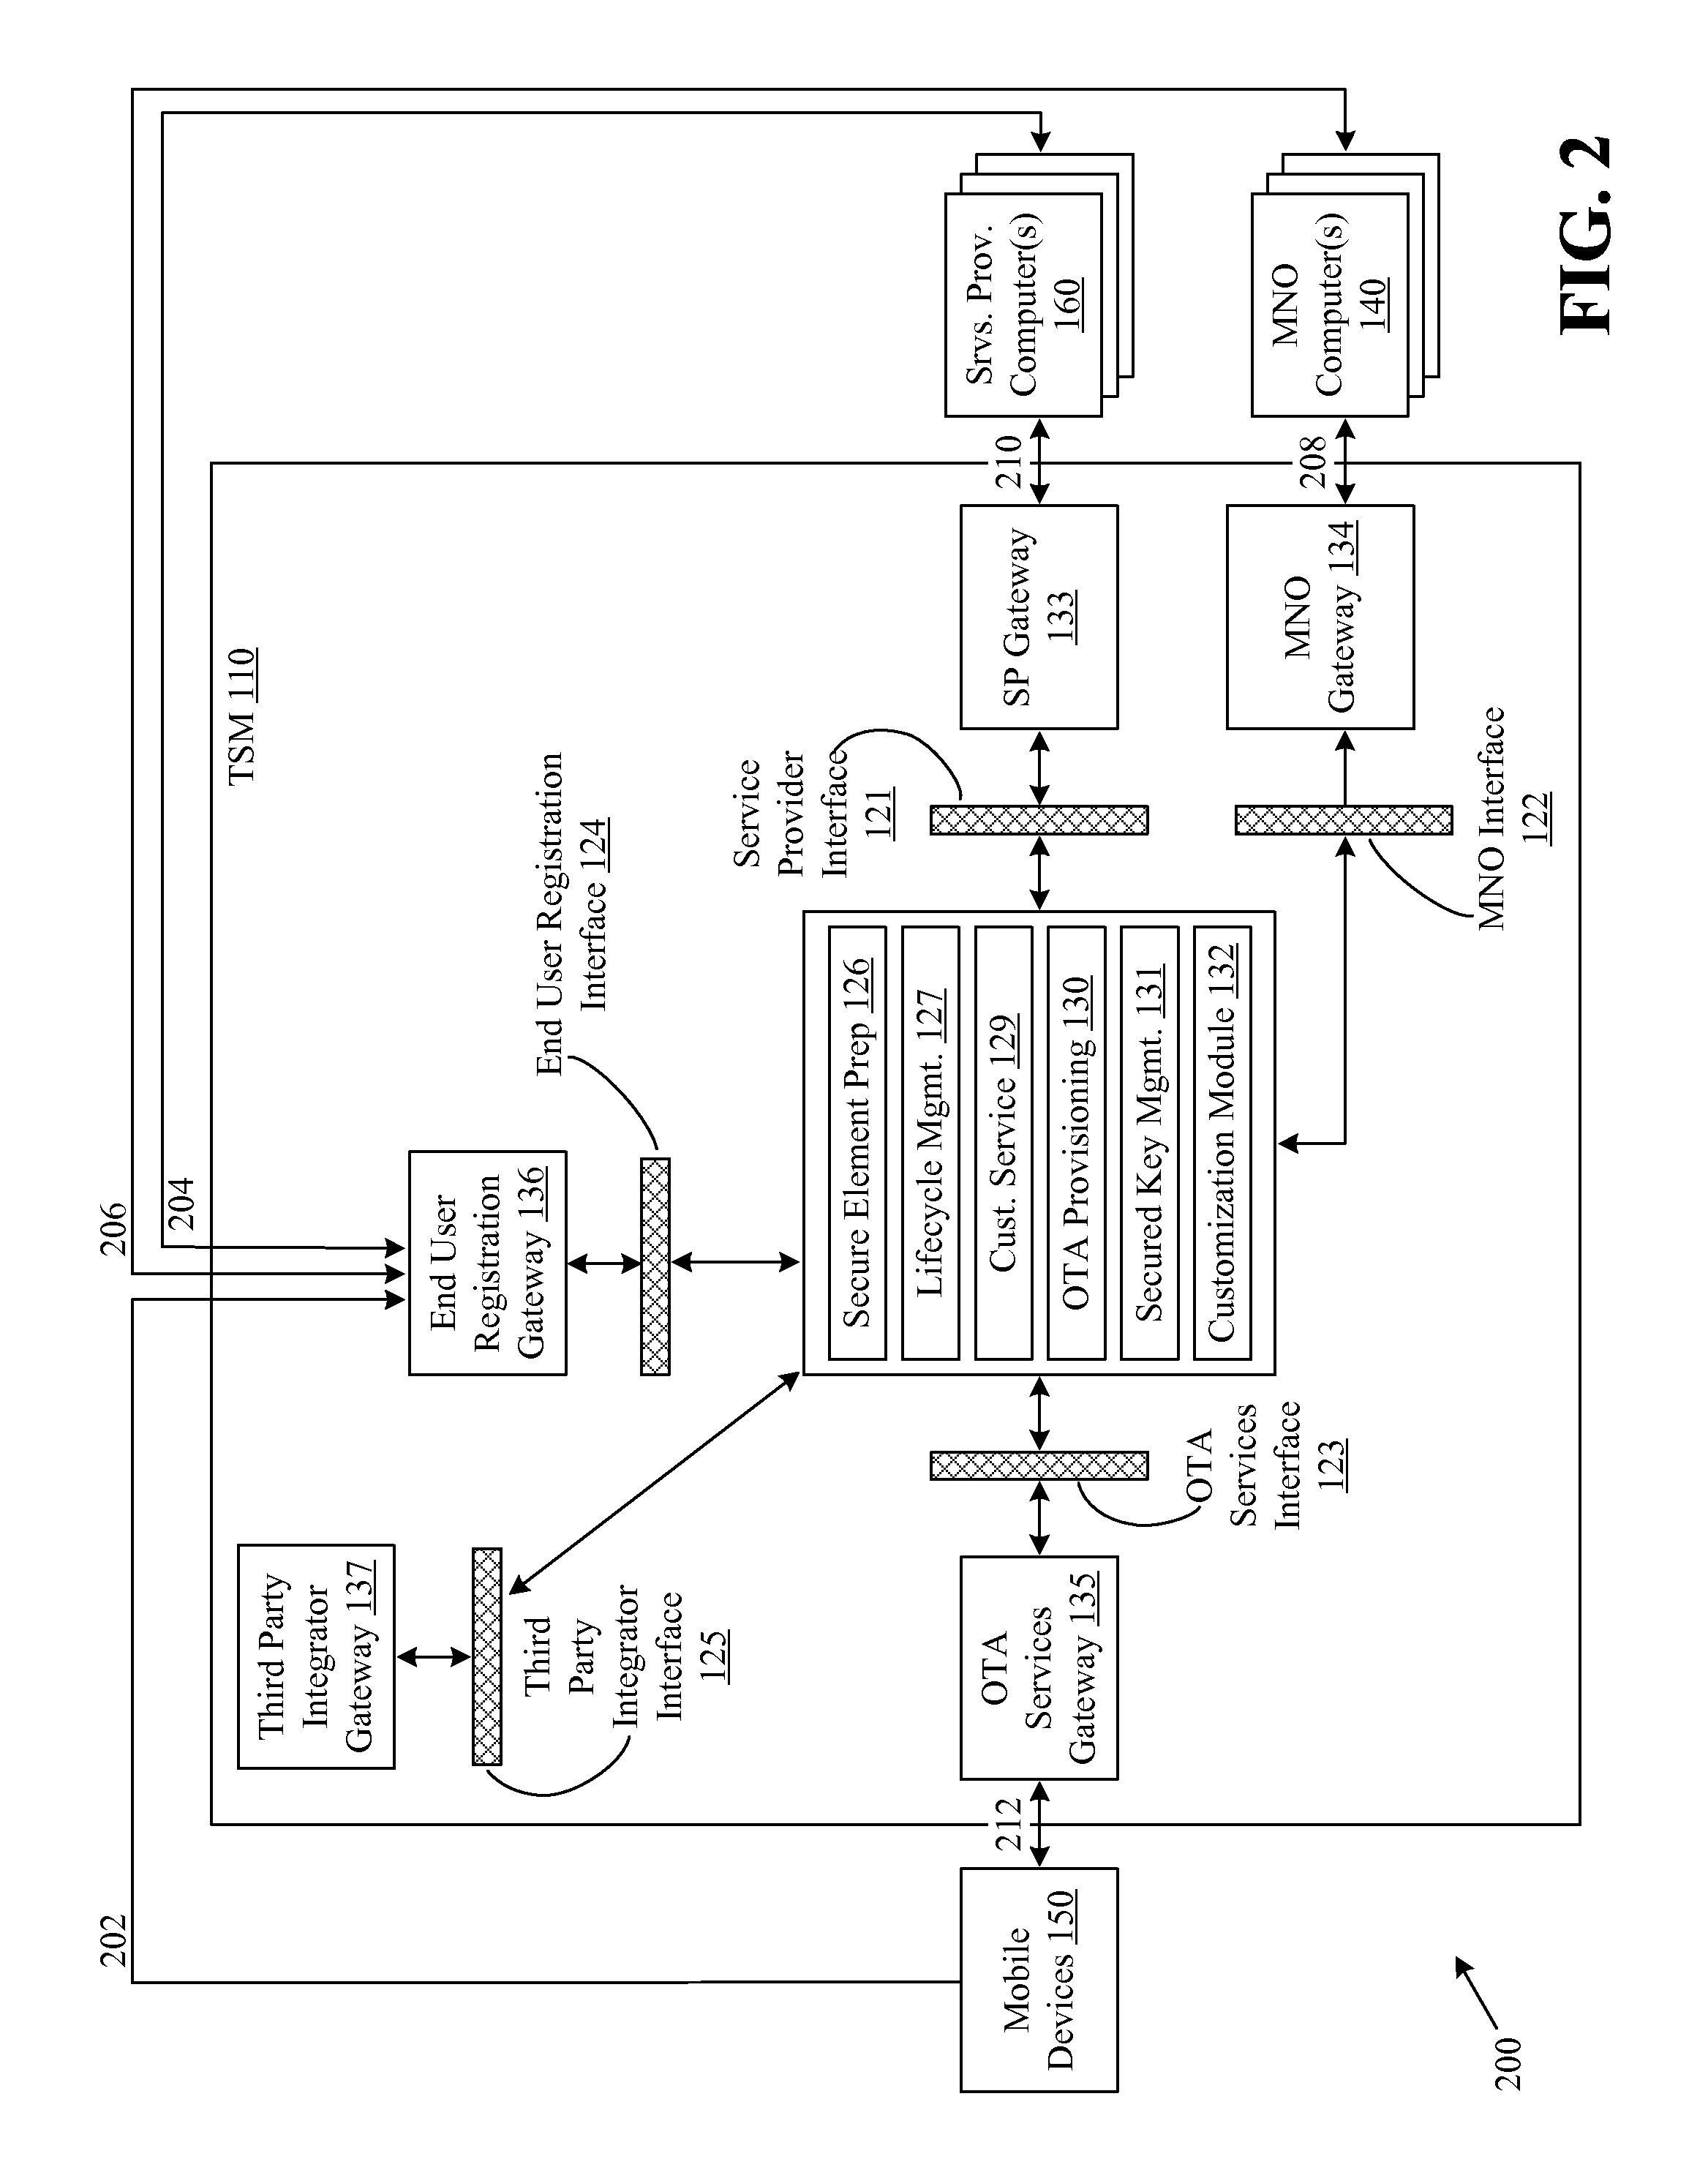 Systems and methods for providing trusted service management services